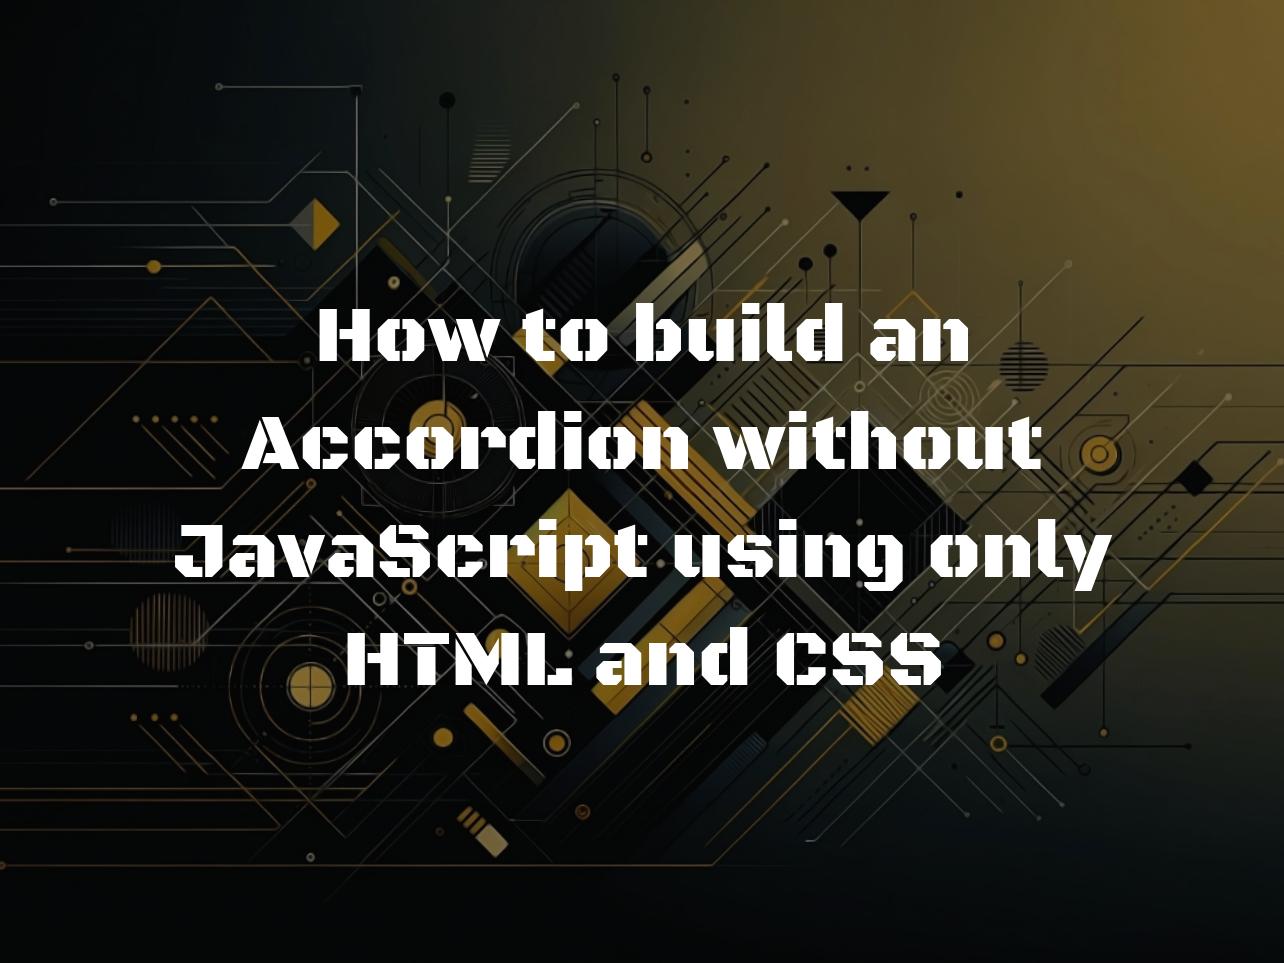 How to build an Accordion without JavaScript using only HTML and CSS